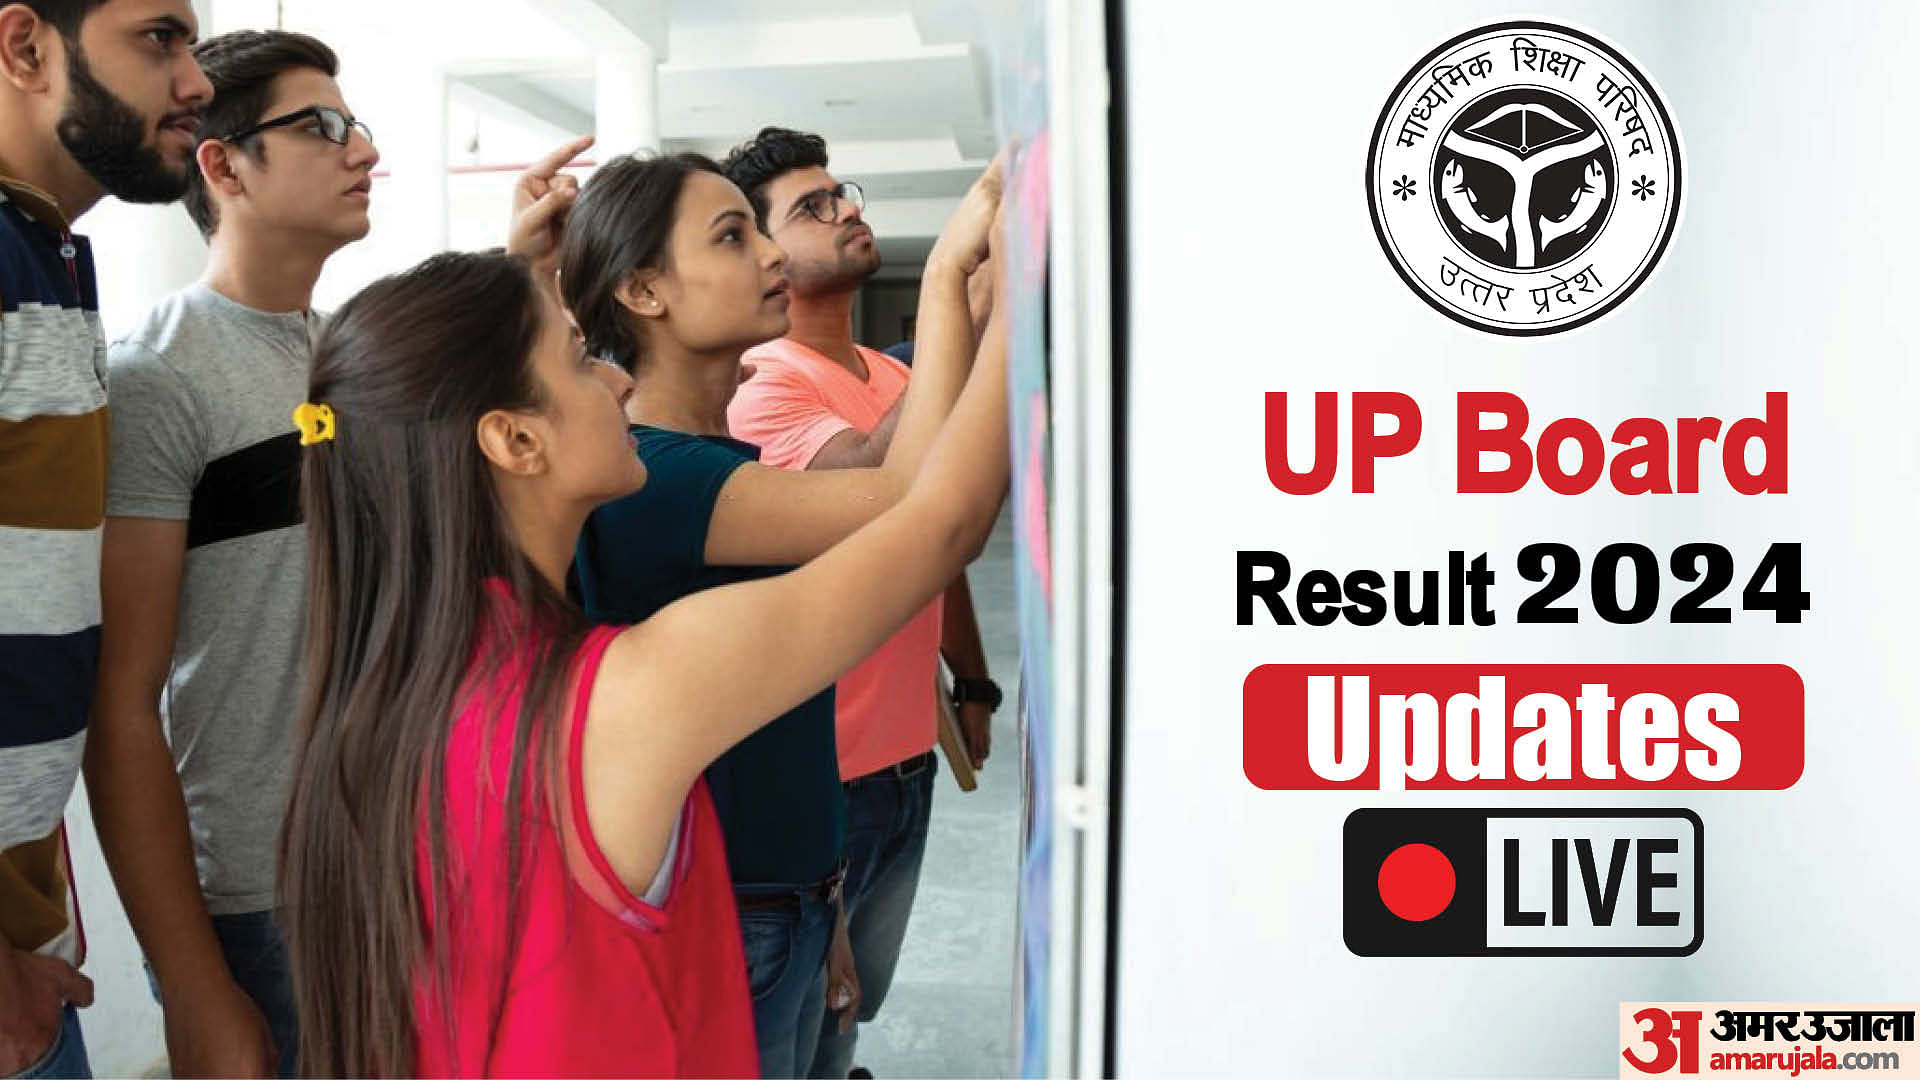 UP Board Result 2024 Live Updates: Class 10th and 12th Expected Soon, Check About The Result Updates Here